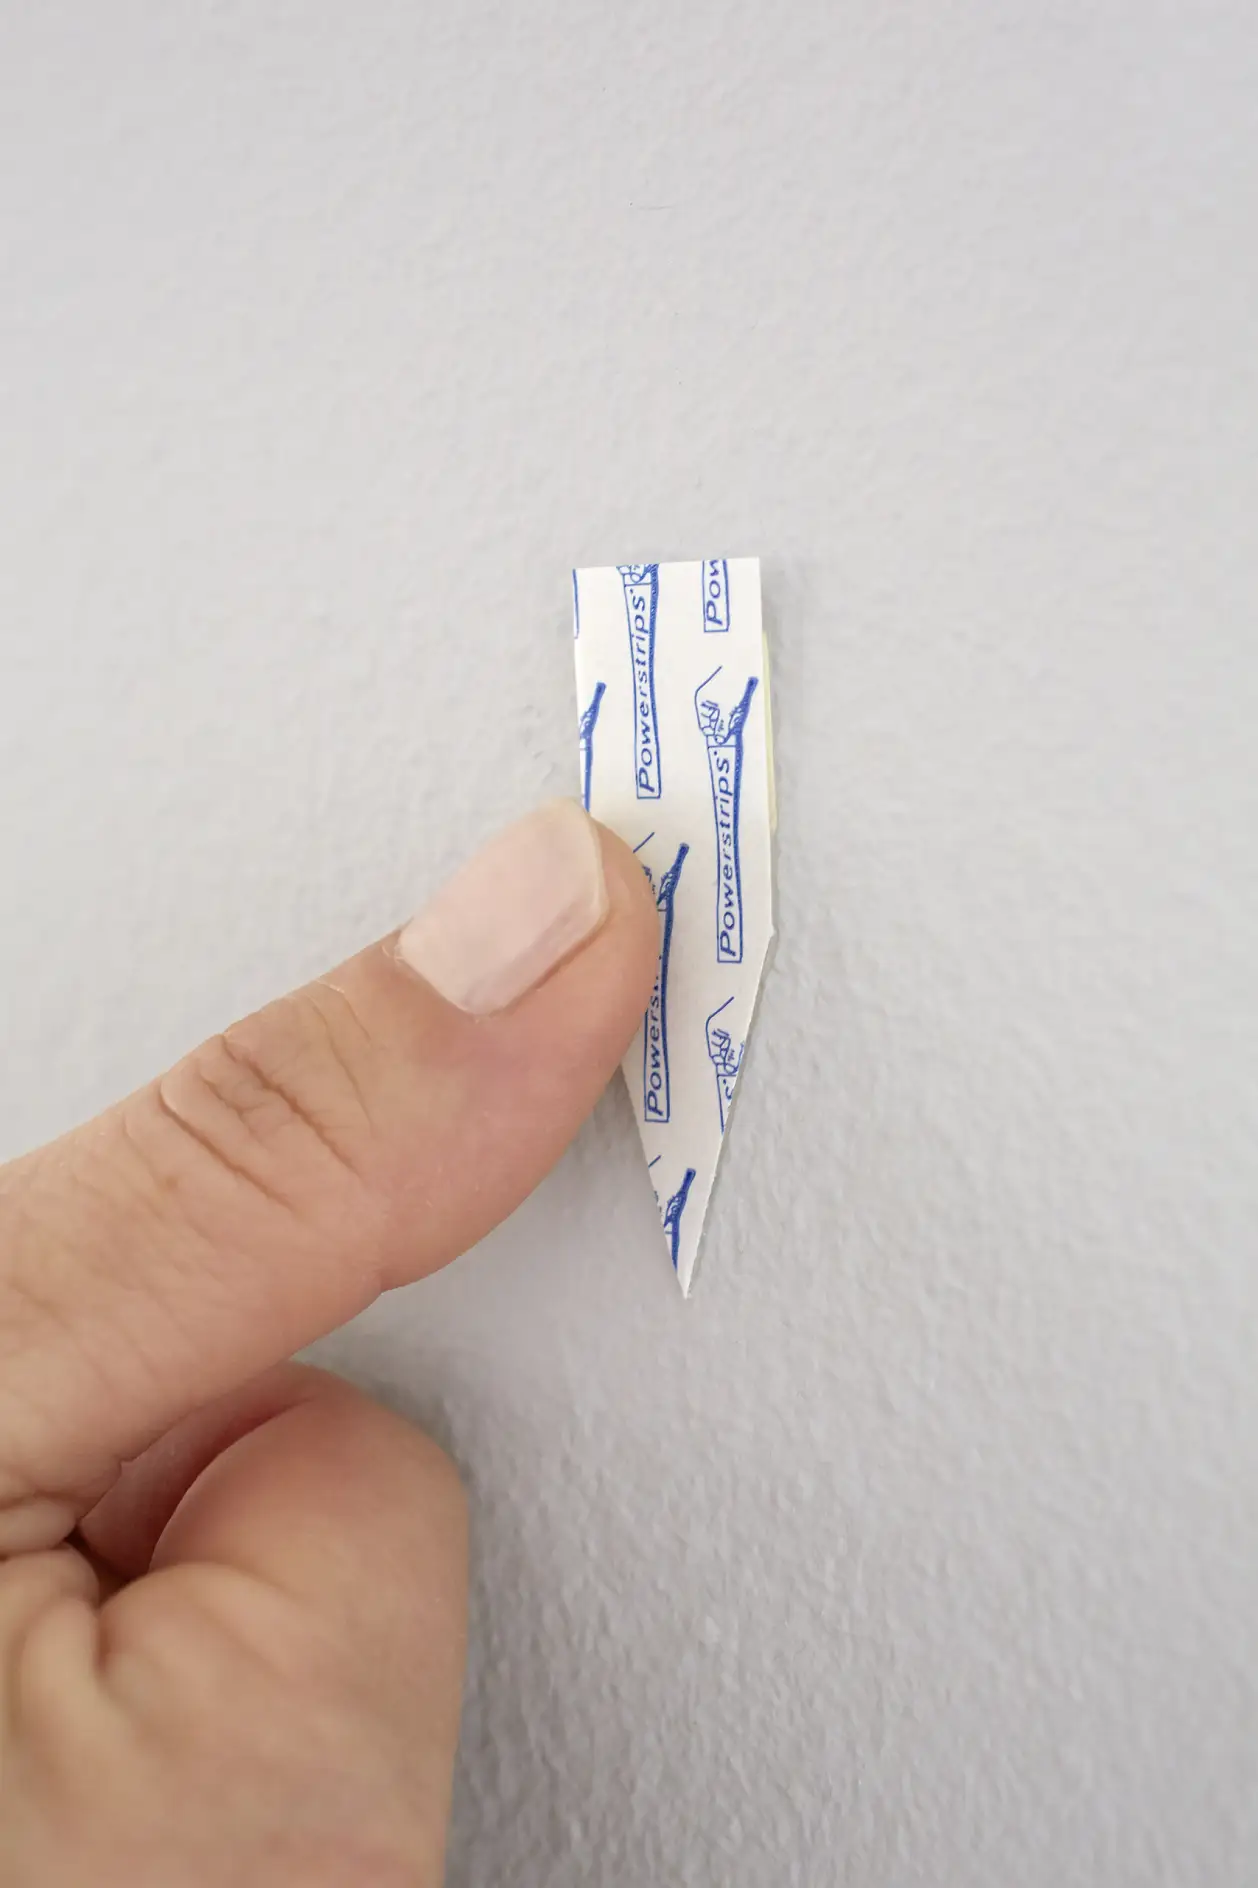 Peel off the tesa Powerstrips® and push them firmly for five seconds to the wall in the desired location.